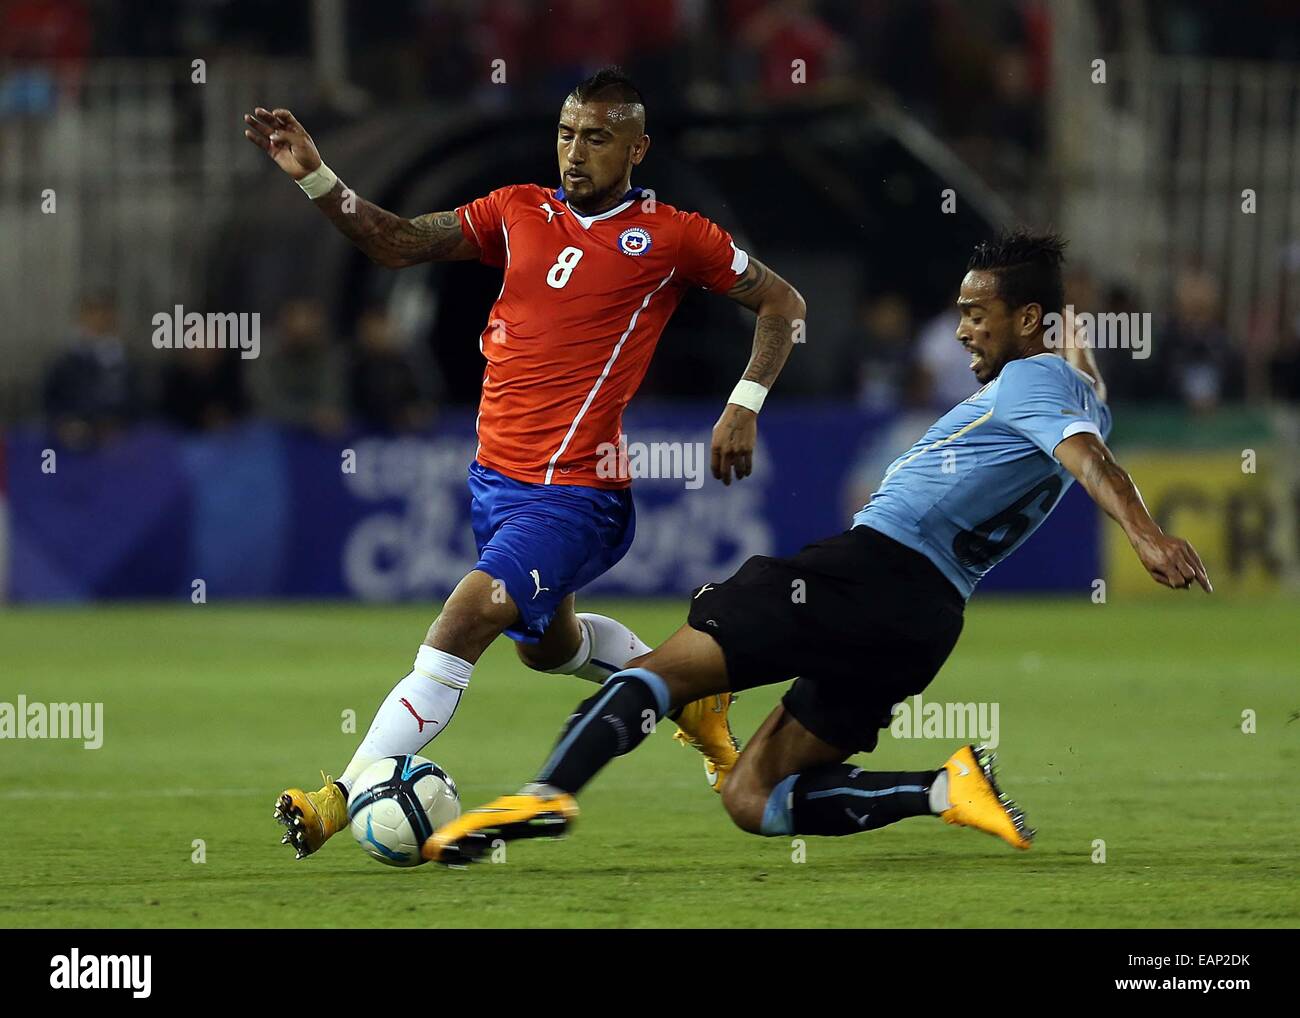 Santiago, Chile. 18th Nov, 2014. Image provided by National Association of Professional Soccer (ANFP, for its acronym in Spanish) of Chile shows Chile's Arturo Vidal (L) vying with Alvaro Pereira (R) of Uruguay during a friendly match at Monumental Stadium, in Santiago, Chile, on Nov. 18, 2014. © ANFP/Xinhua/Alamy Live News Stock Photo